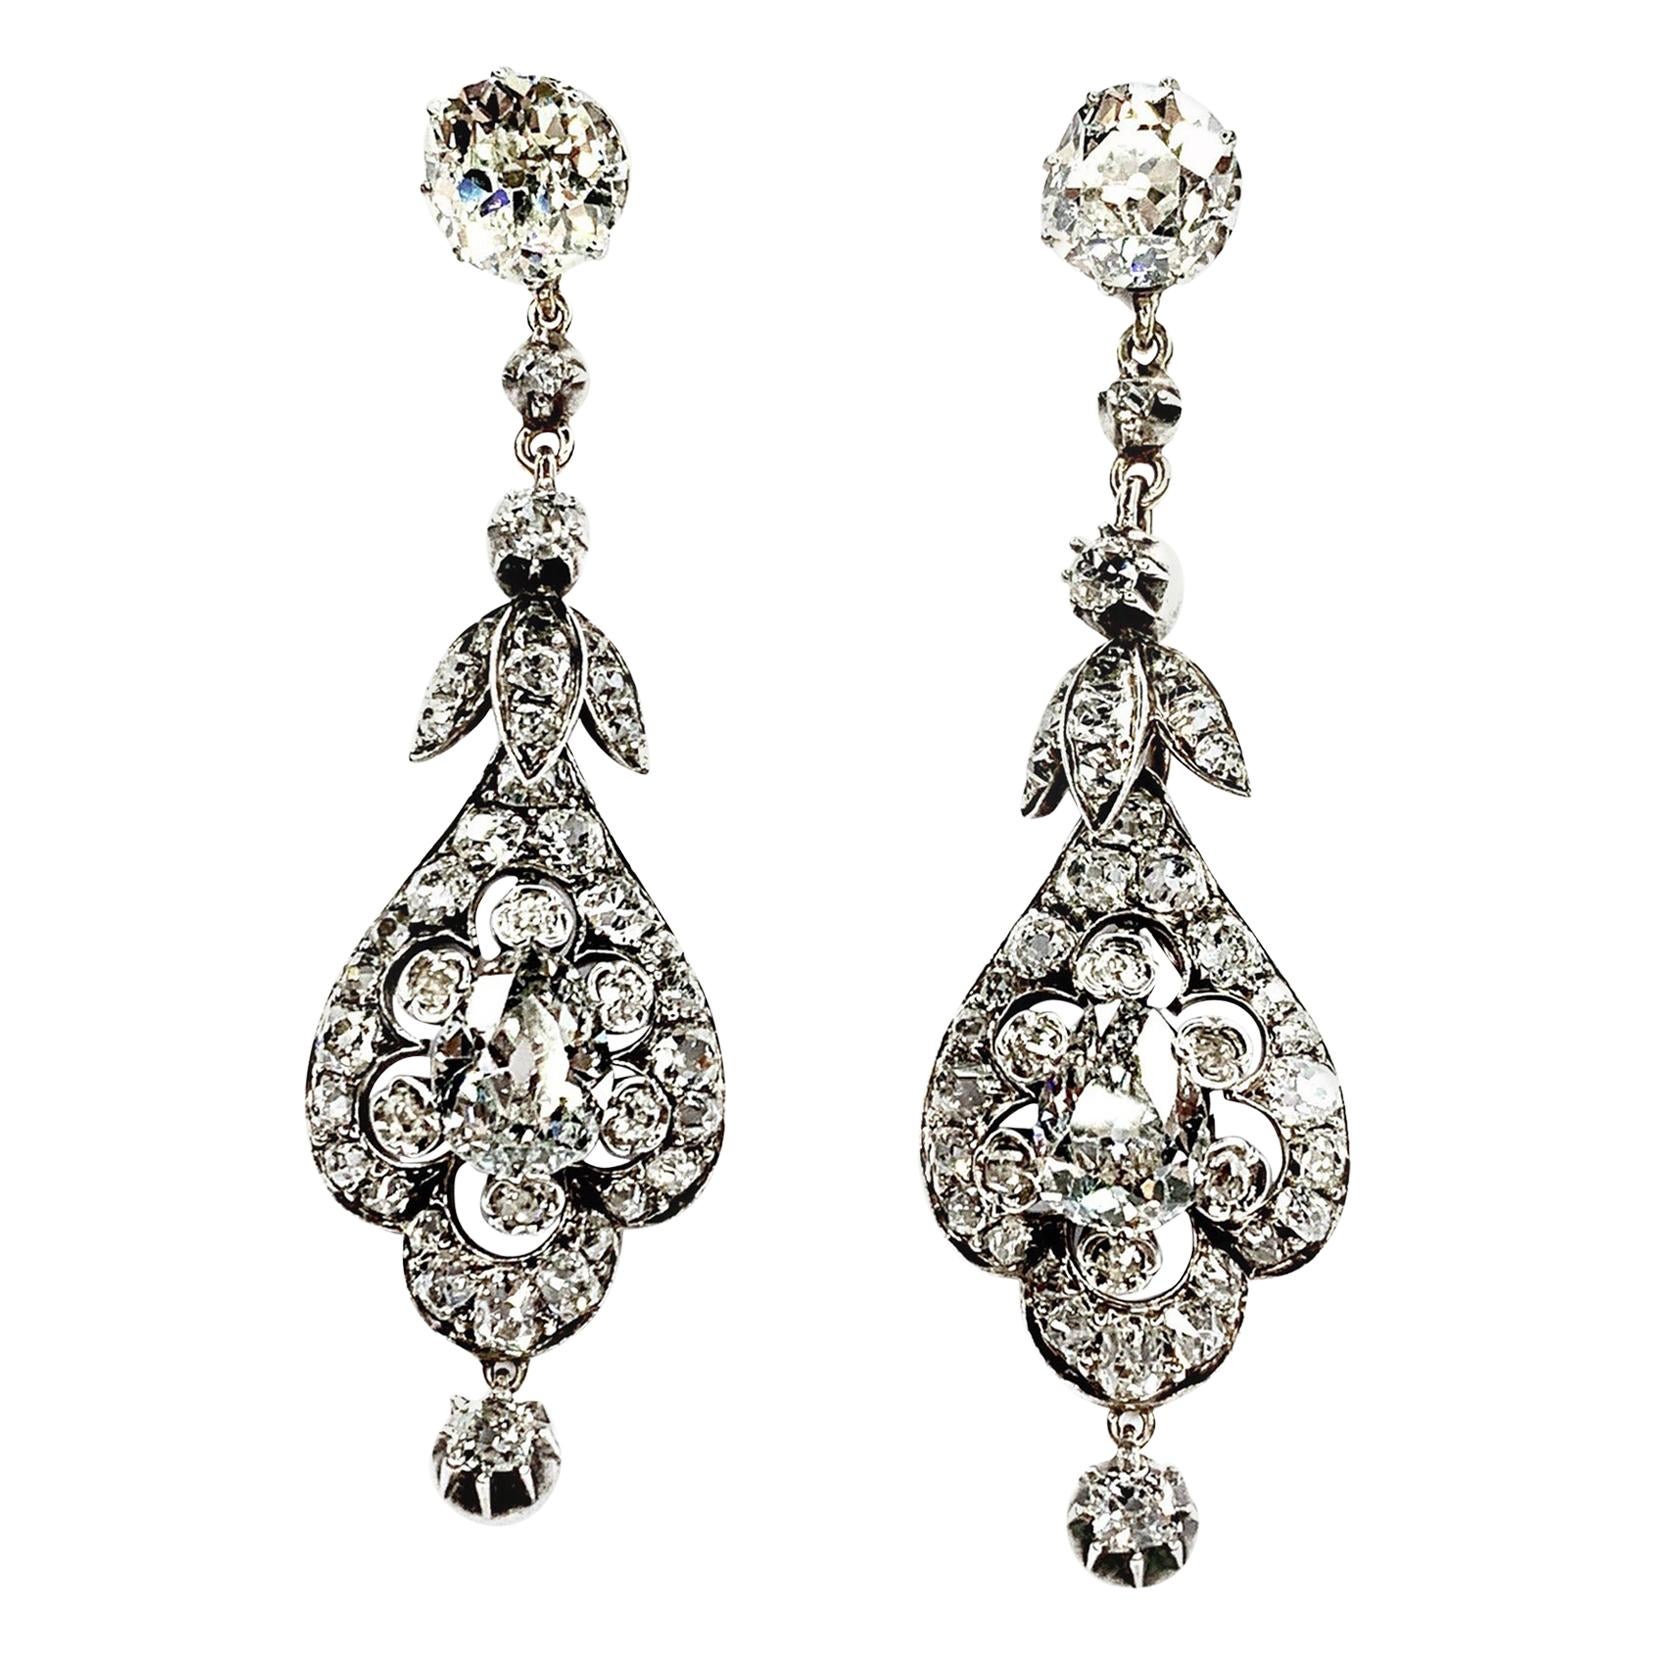 Gemolithos Antique Pair of Diamond Earrings, Formerly from a Princely Family